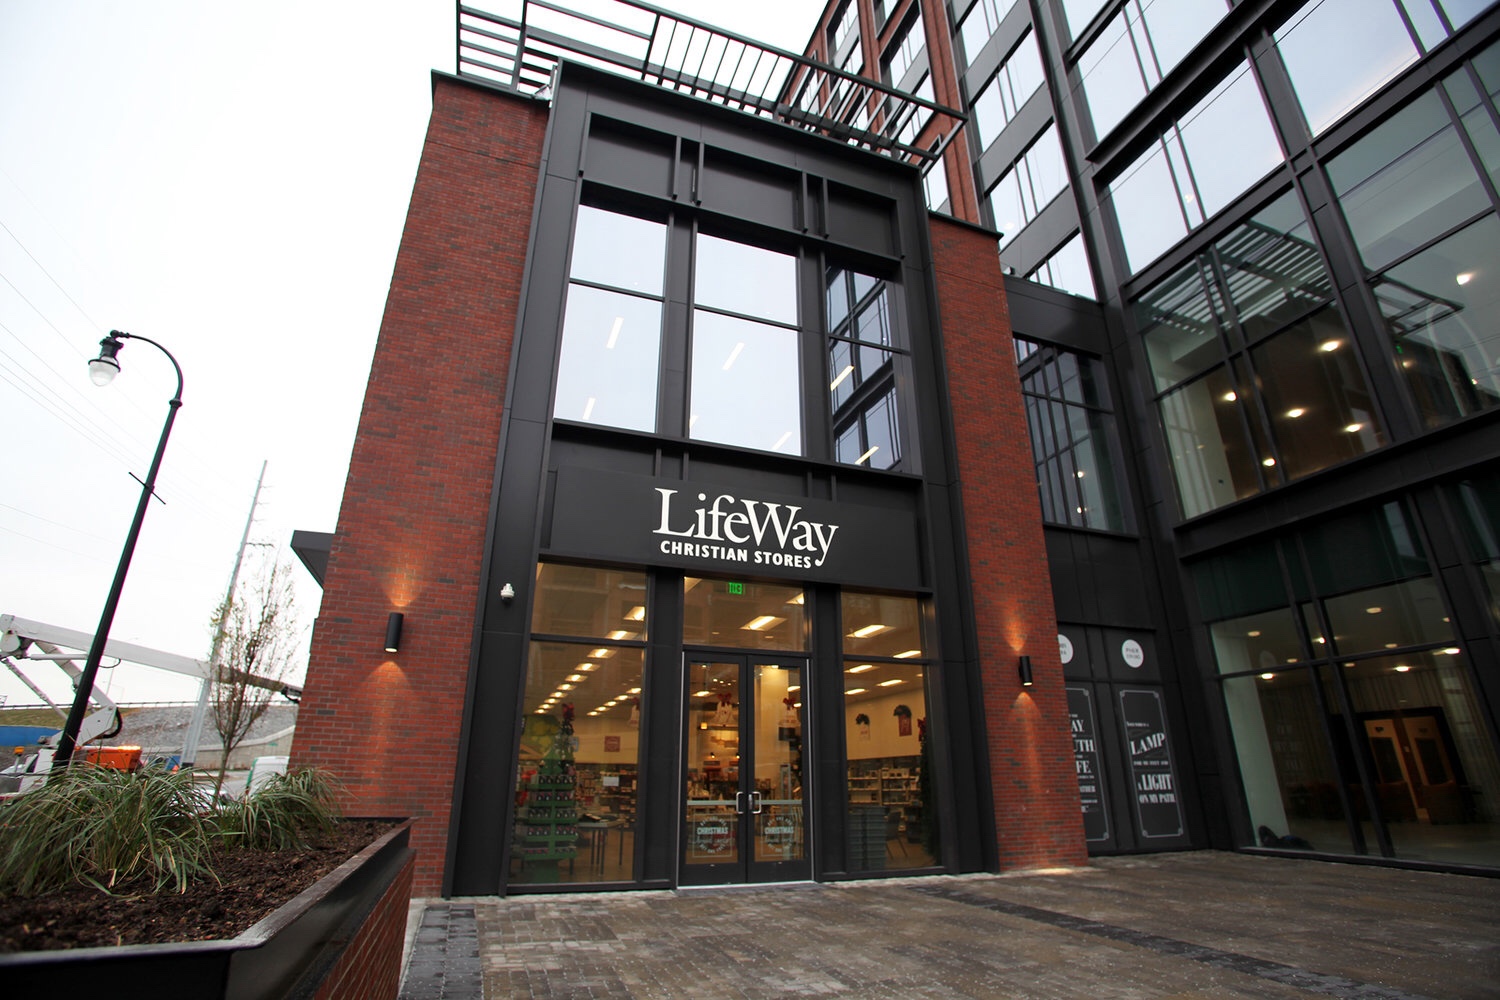 Some LifeWay Christian Stores are to close due to a decline in sales. The number of stores to close and the timing of those closures has not been announced. (Baptist Press photo)